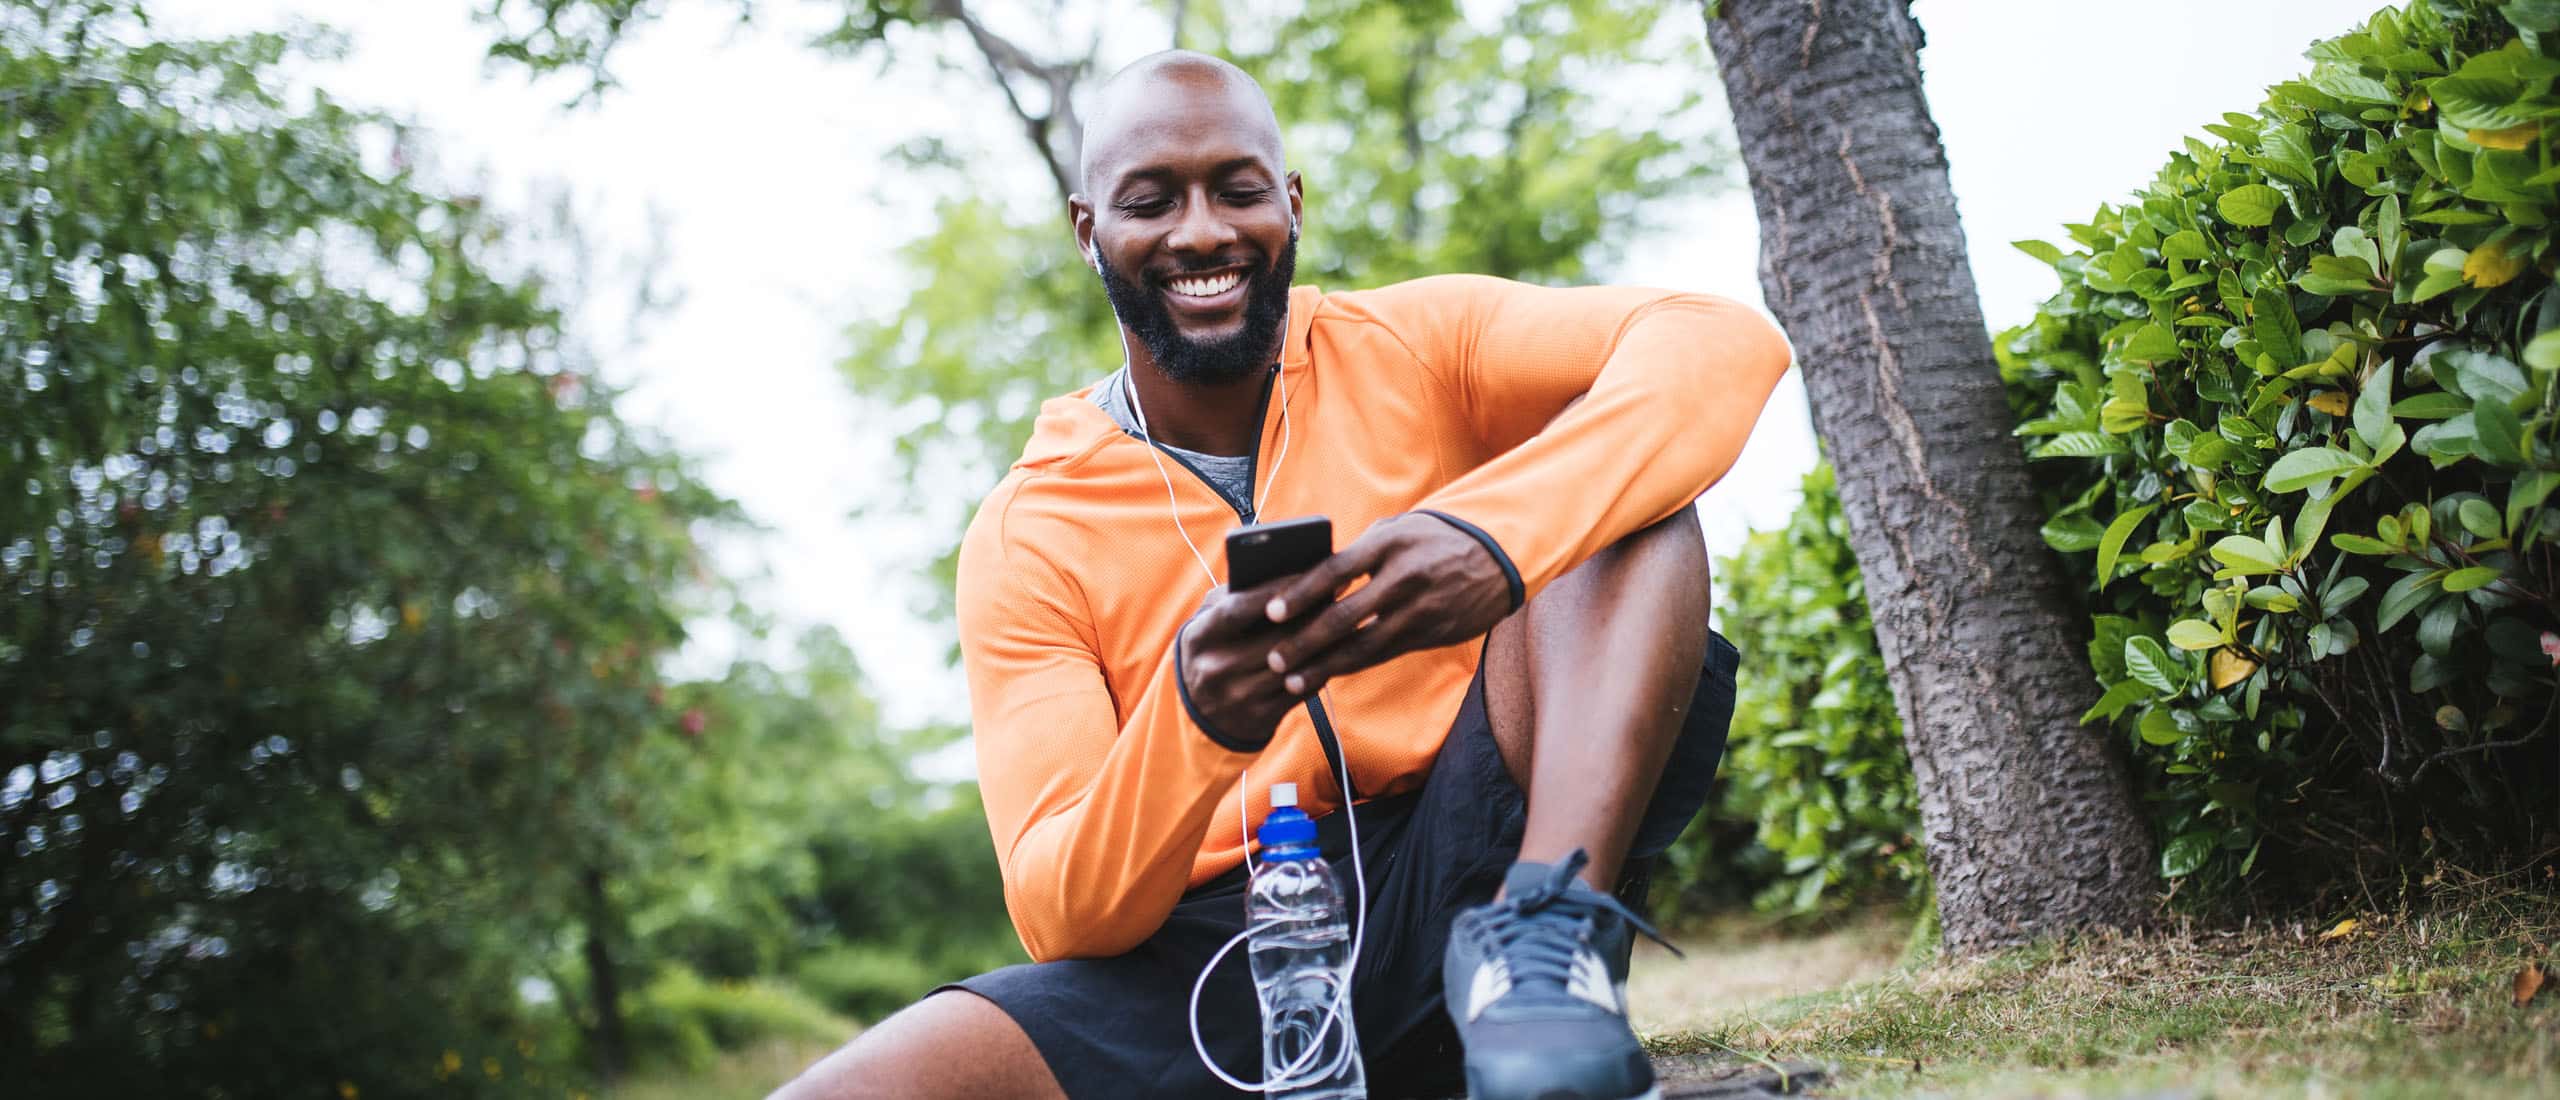 Man sitting down after workout looking on phone smiling